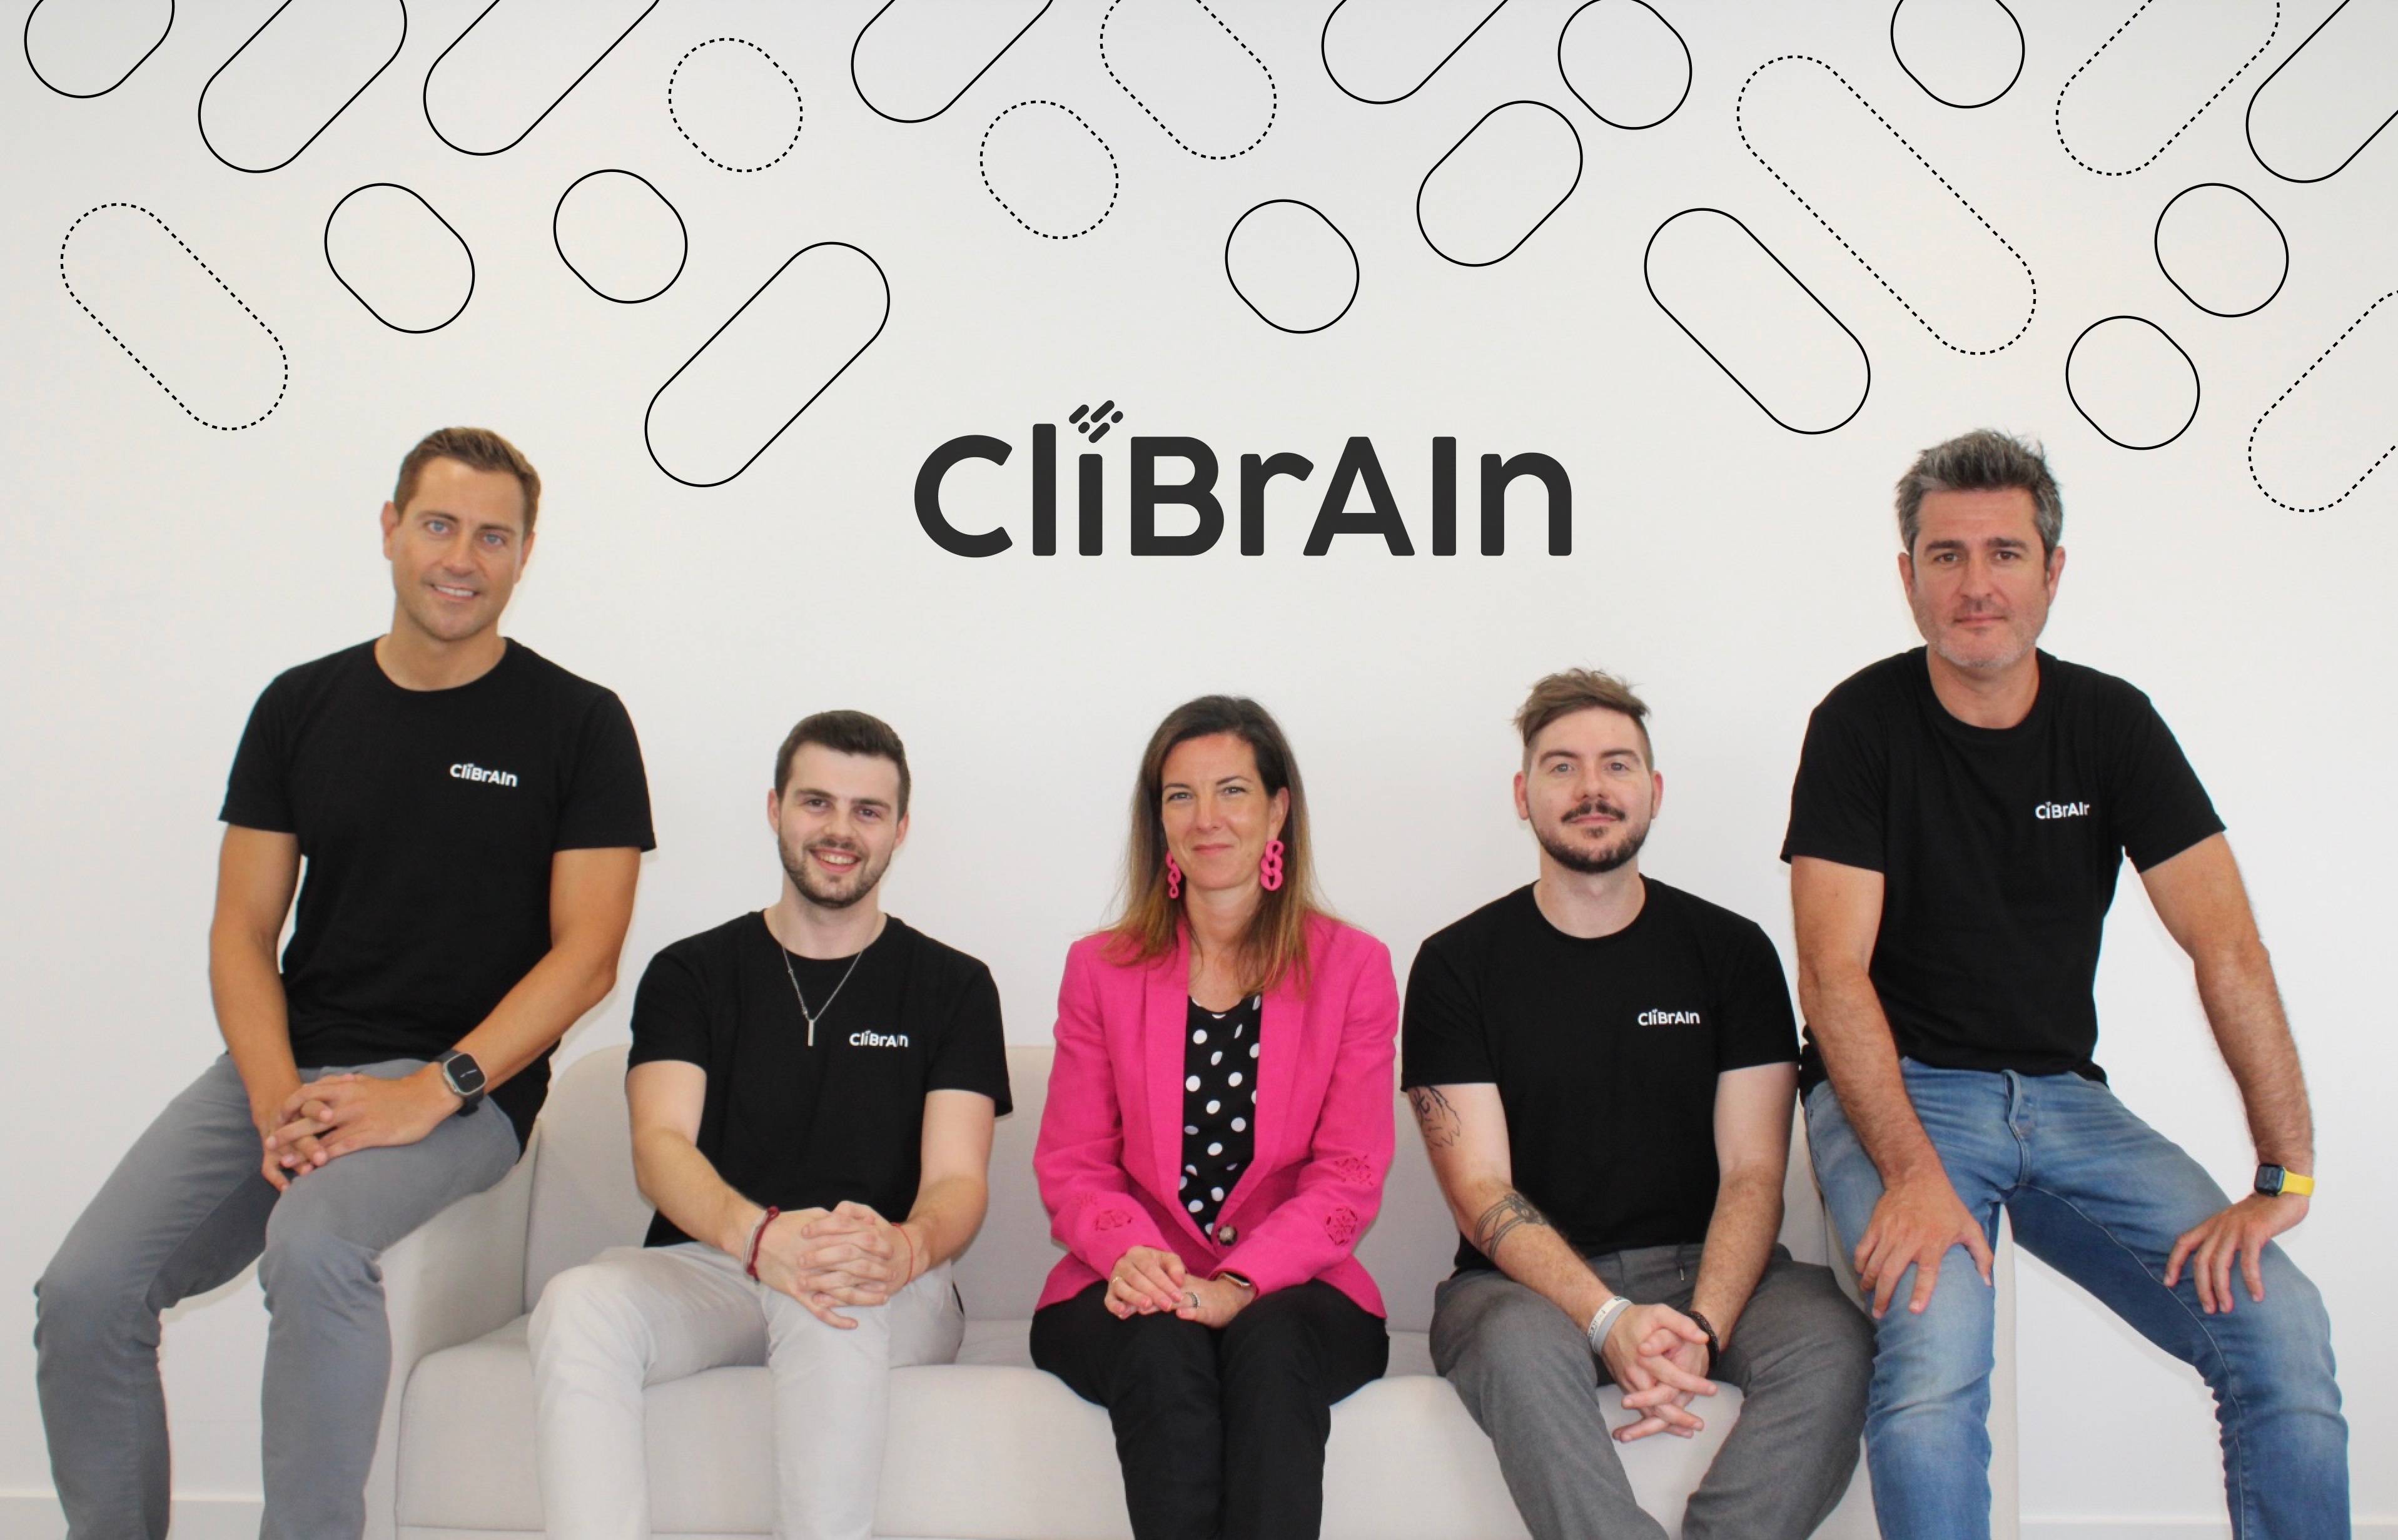 Co-founders ClibrAIn